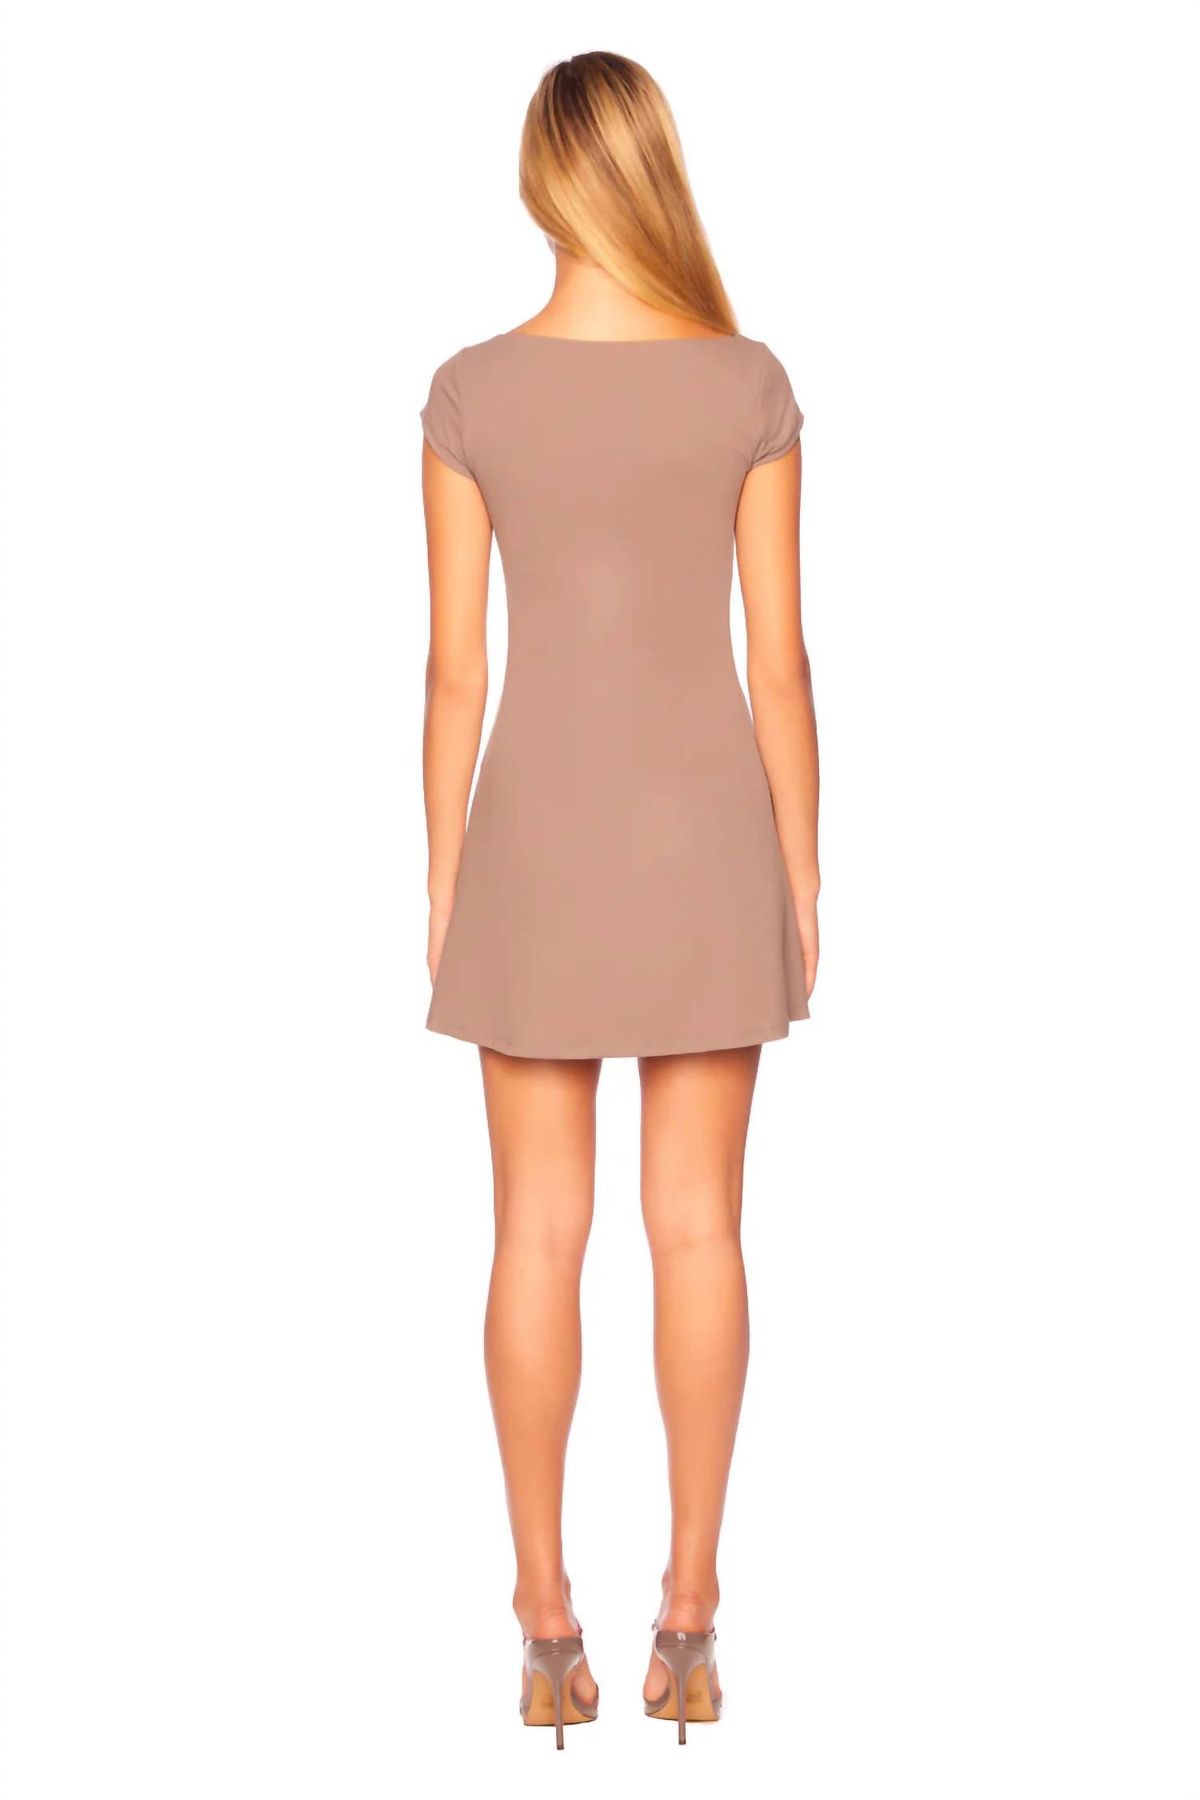 Style 1-3199139858-3236 Susana Monaco Size S Cap Sleeve Brown Cocktail Dress on Queenly